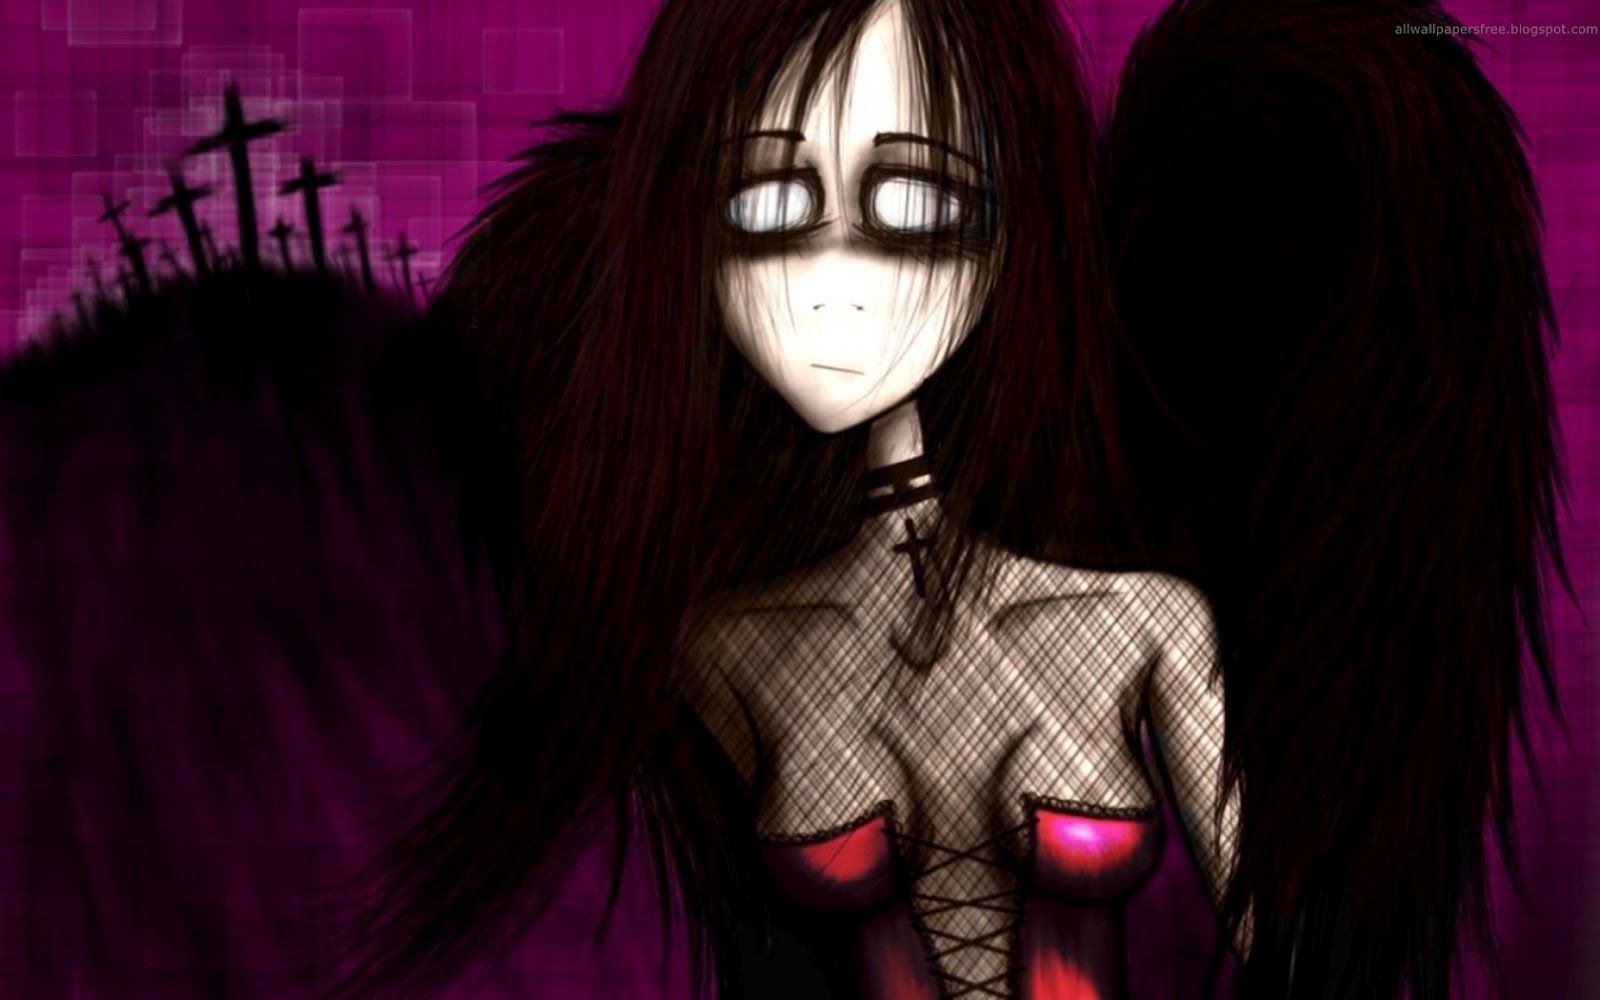 Scary Wallpaper: scary wallpaper grunge ladies